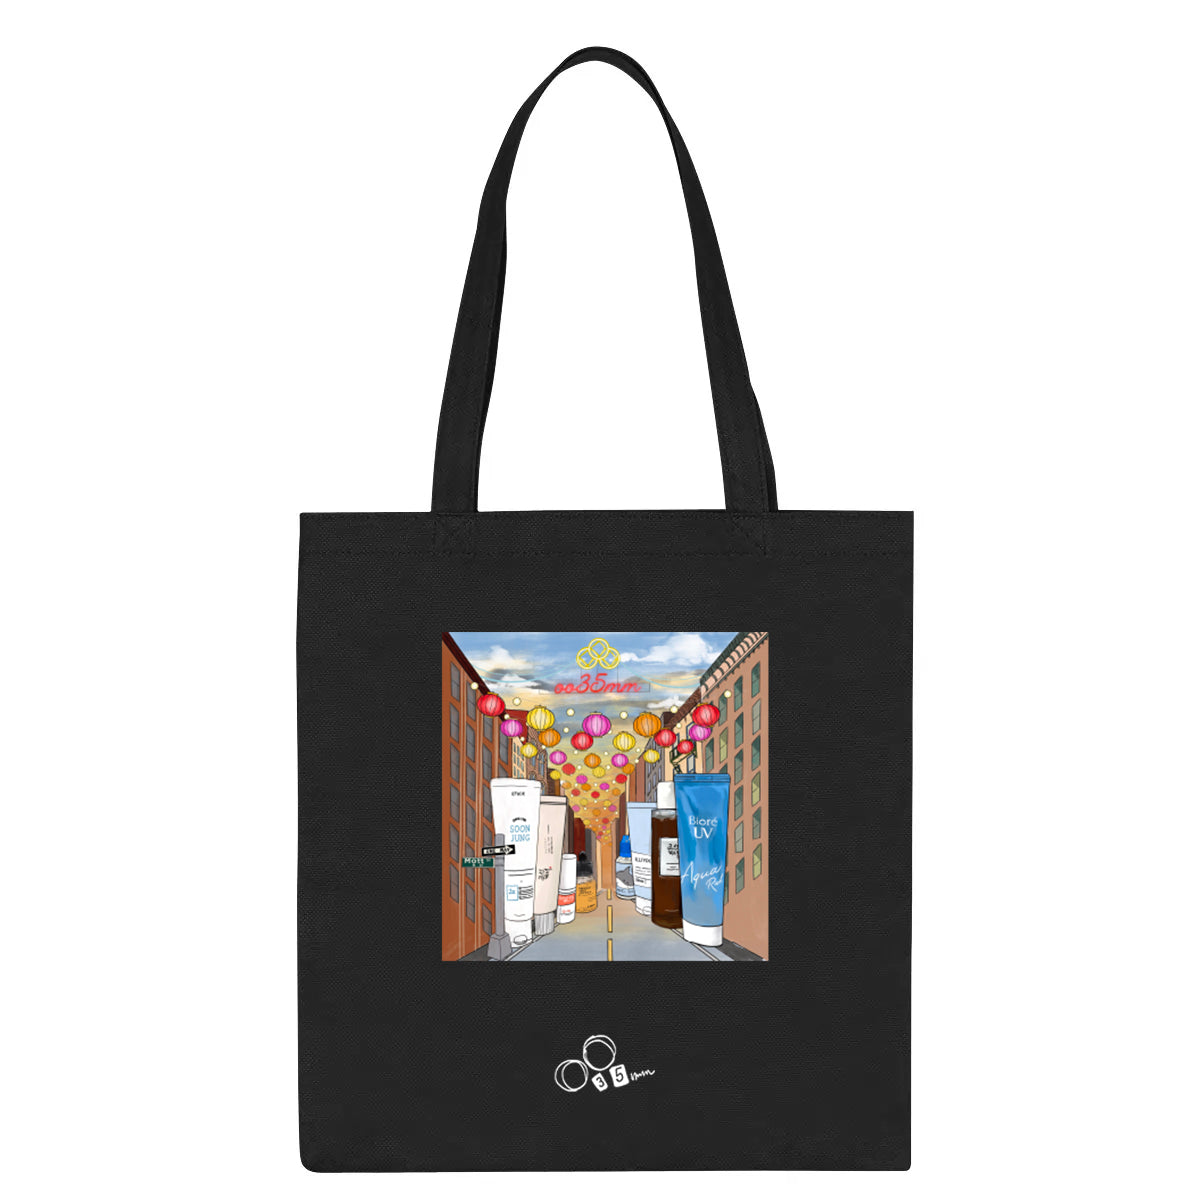 New Year Tote Shopping Totes oo35mm   